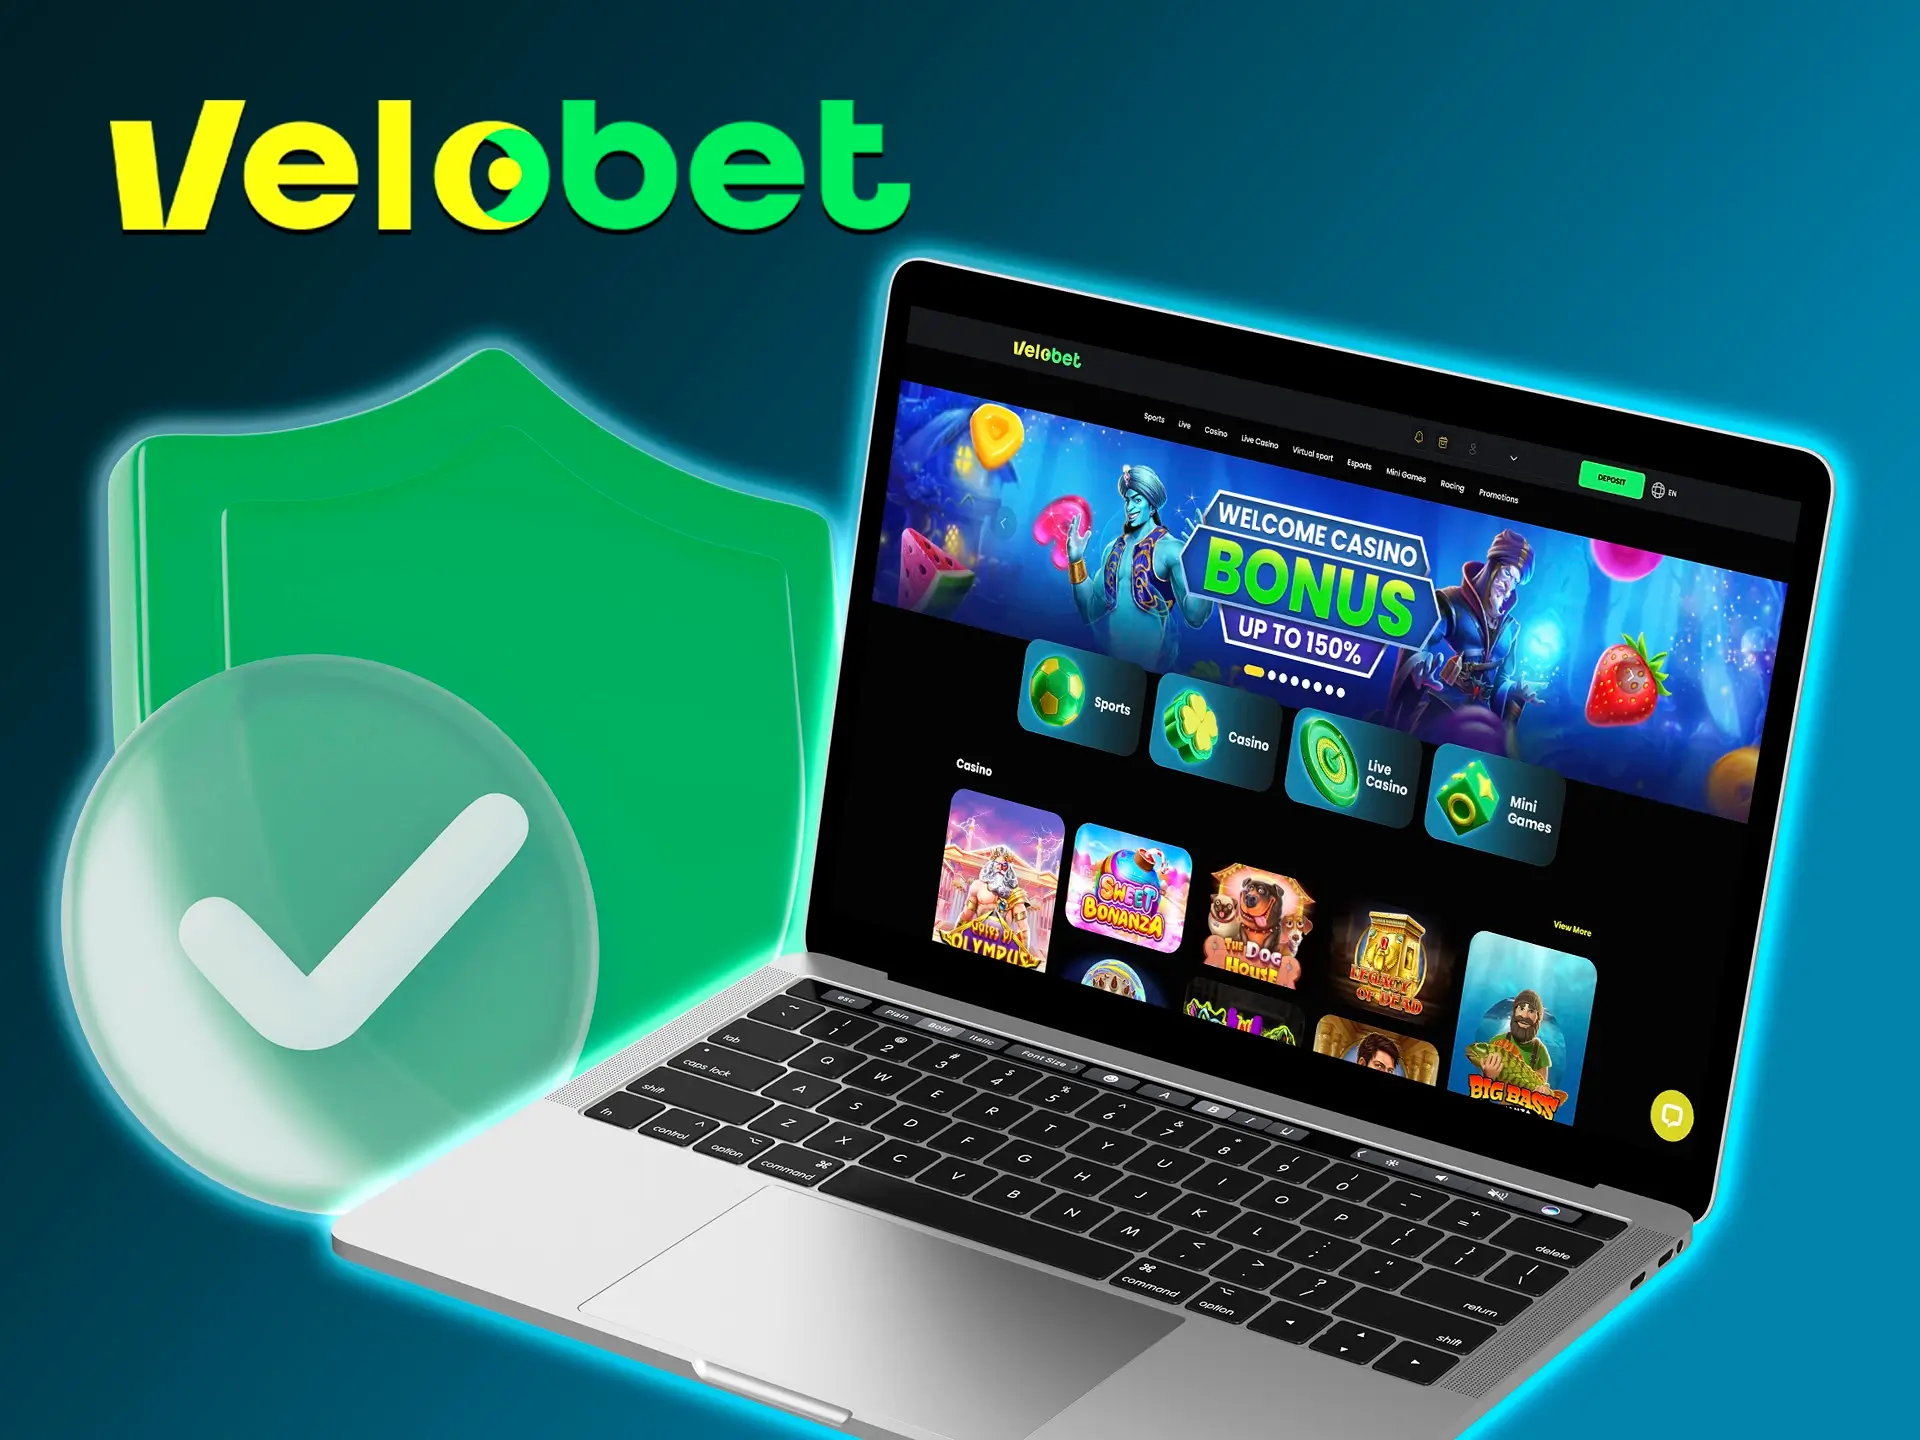 Velobet provides its users with a high level of protection and a fully legal casino.